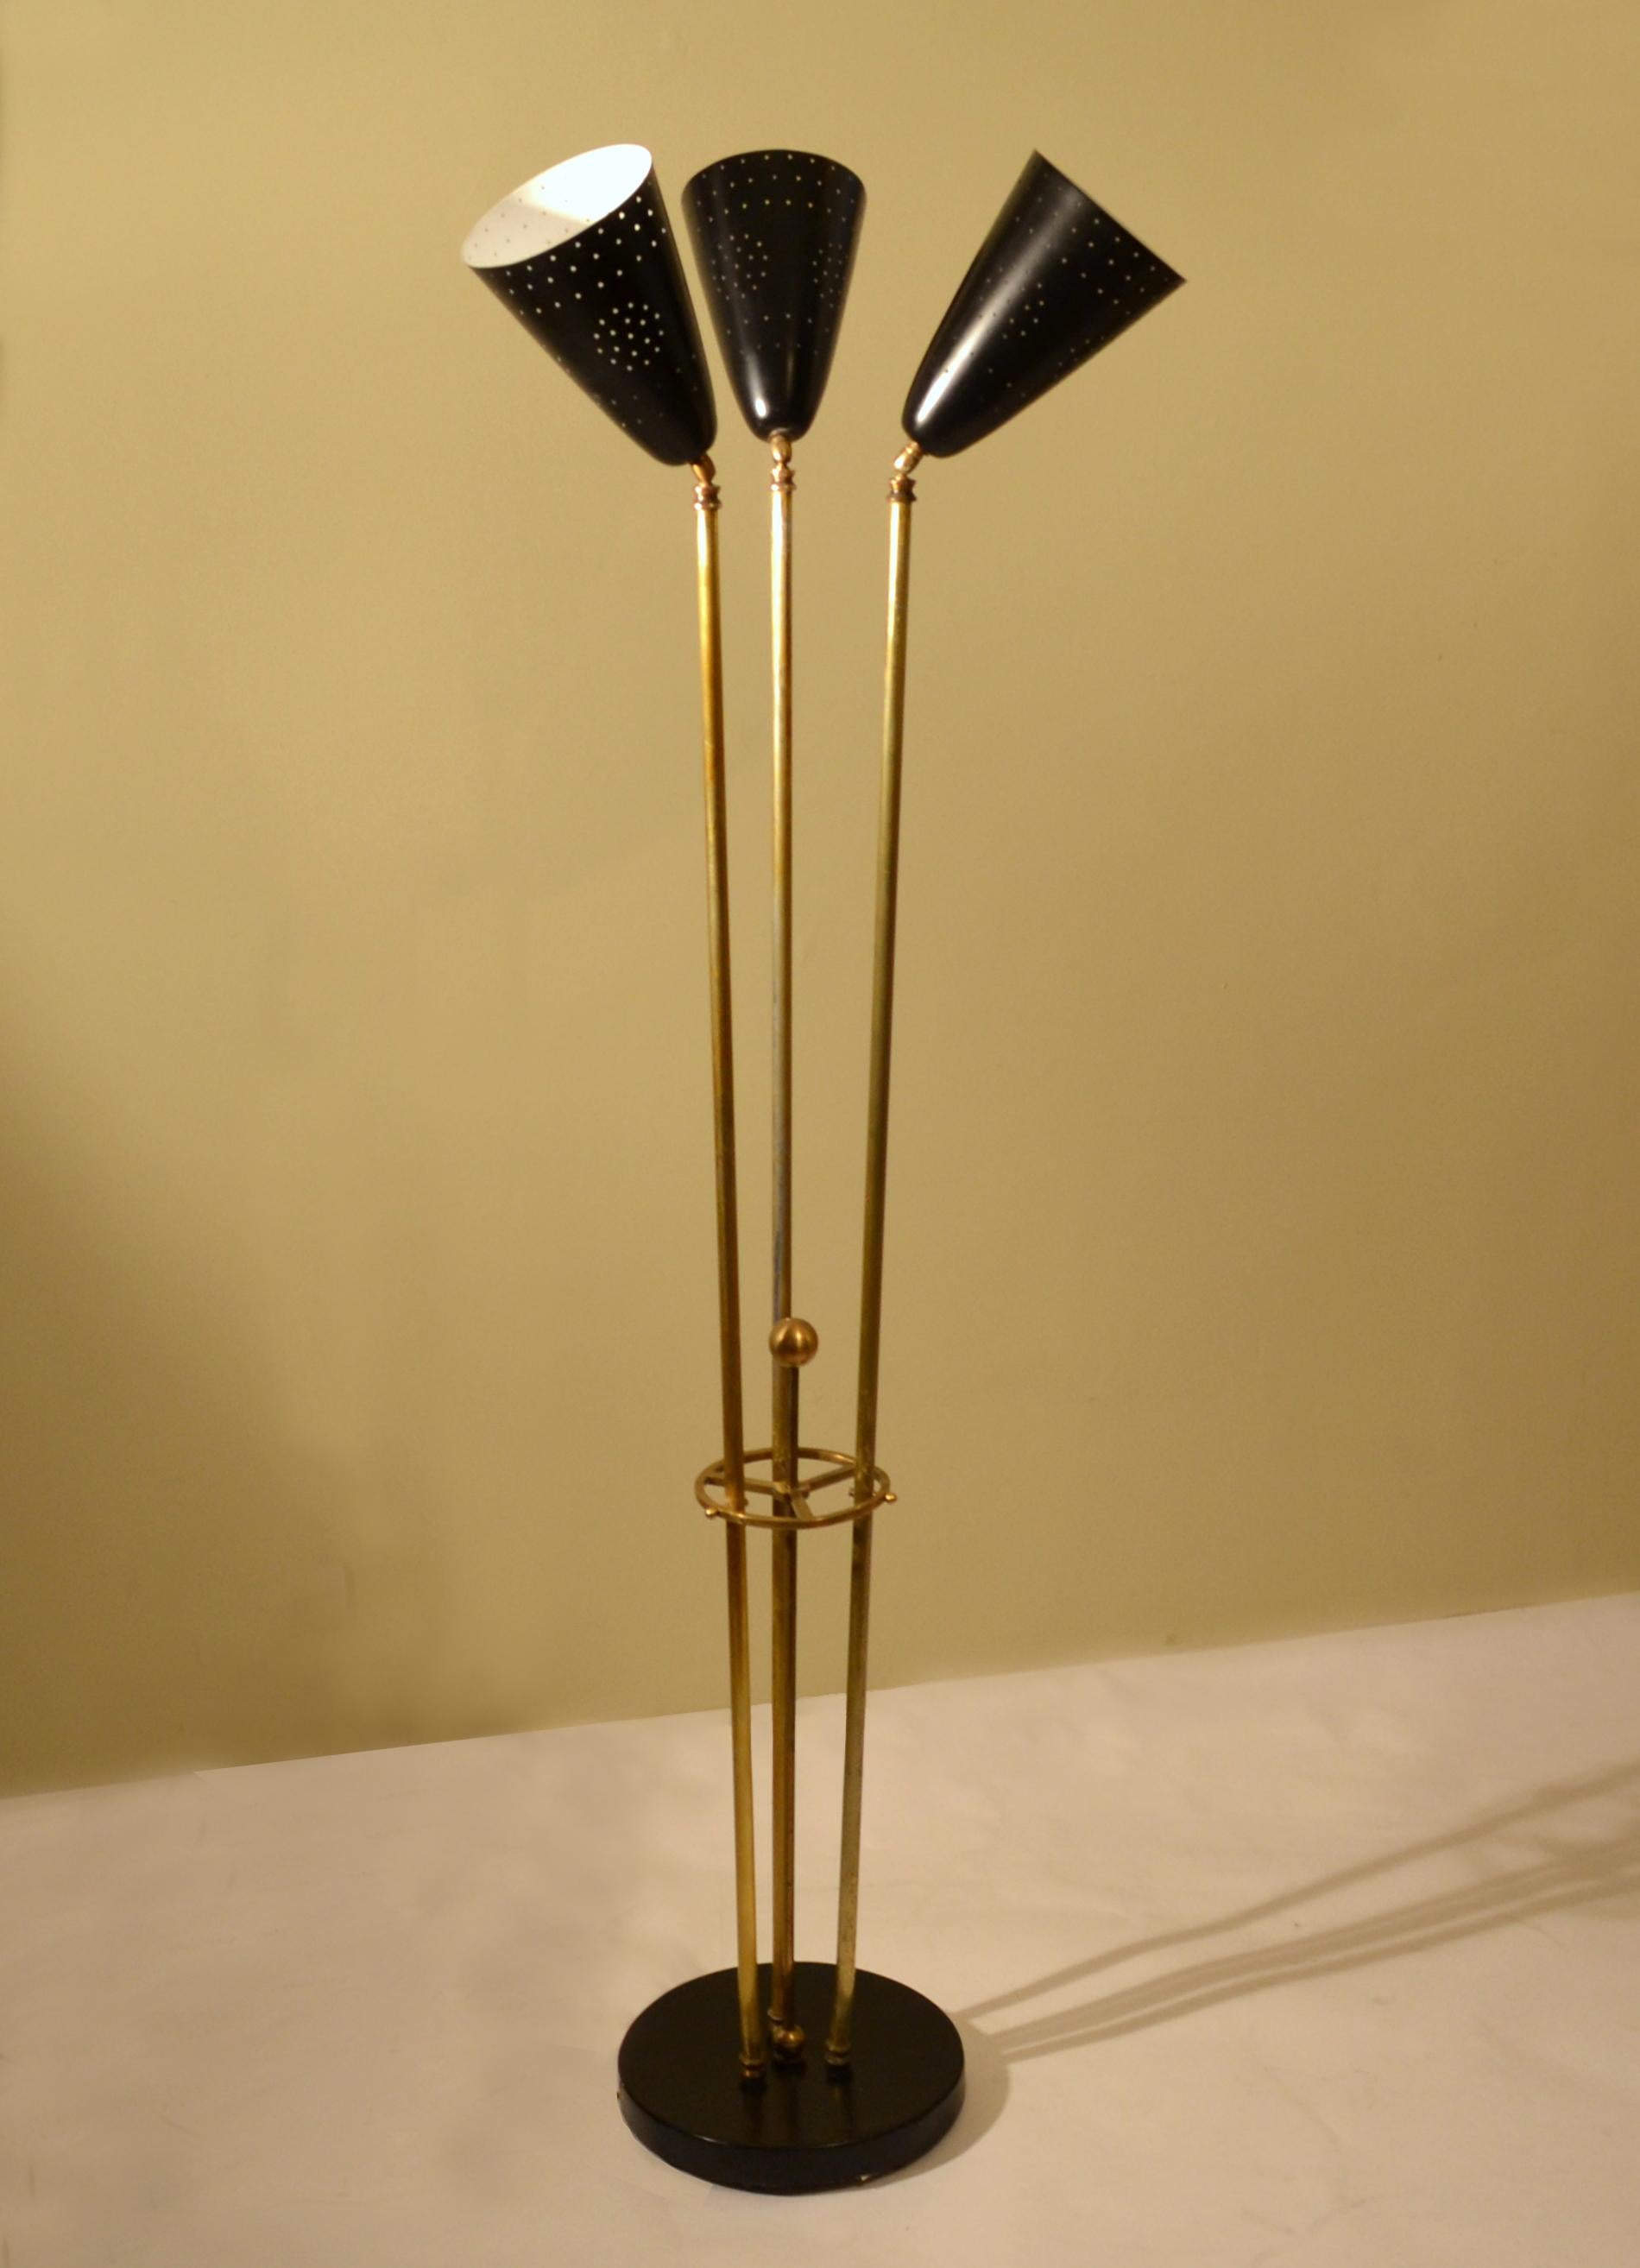 Mid-Century Modern Italian 1950s Floor Lamp with Articulated Black Perforated Shades and Brass